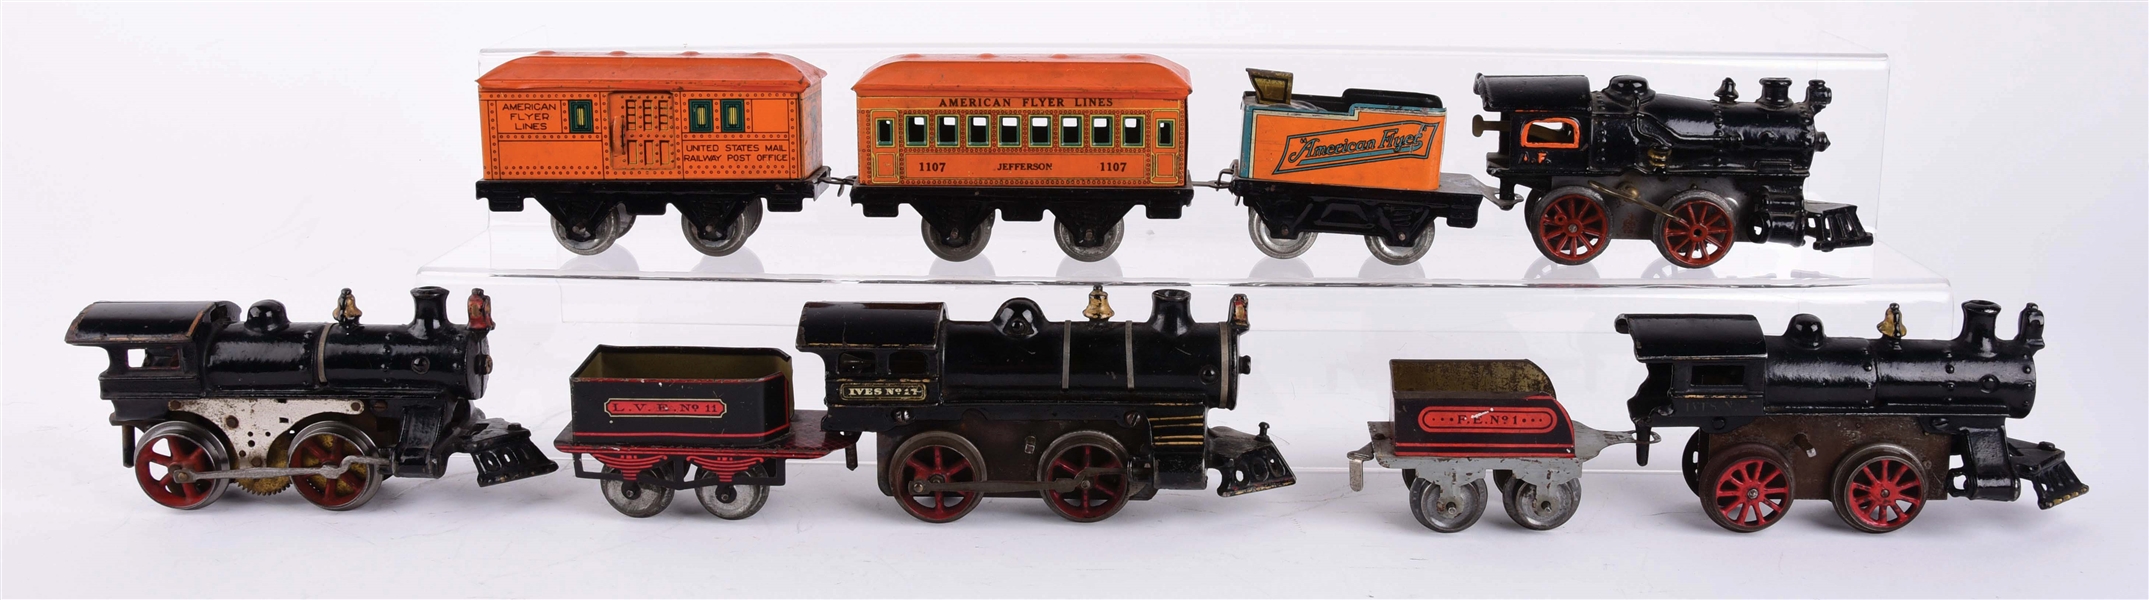 NICE EARLY IVES AND AMERICAN FLYER O GAUGE TRAIN LOT.